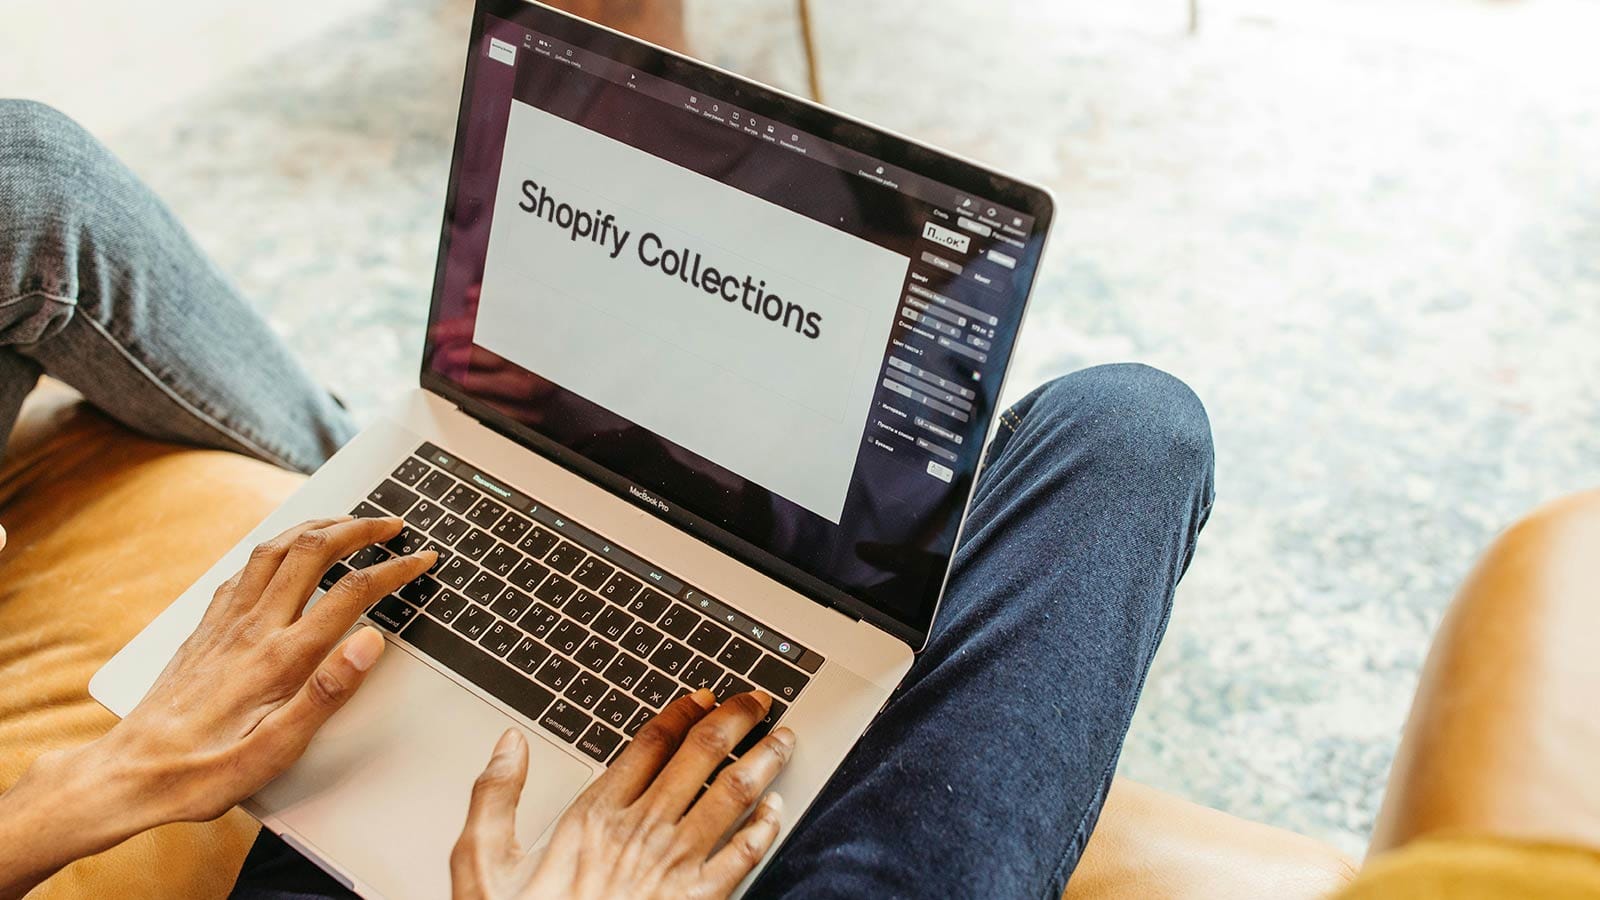 Shopify Collections